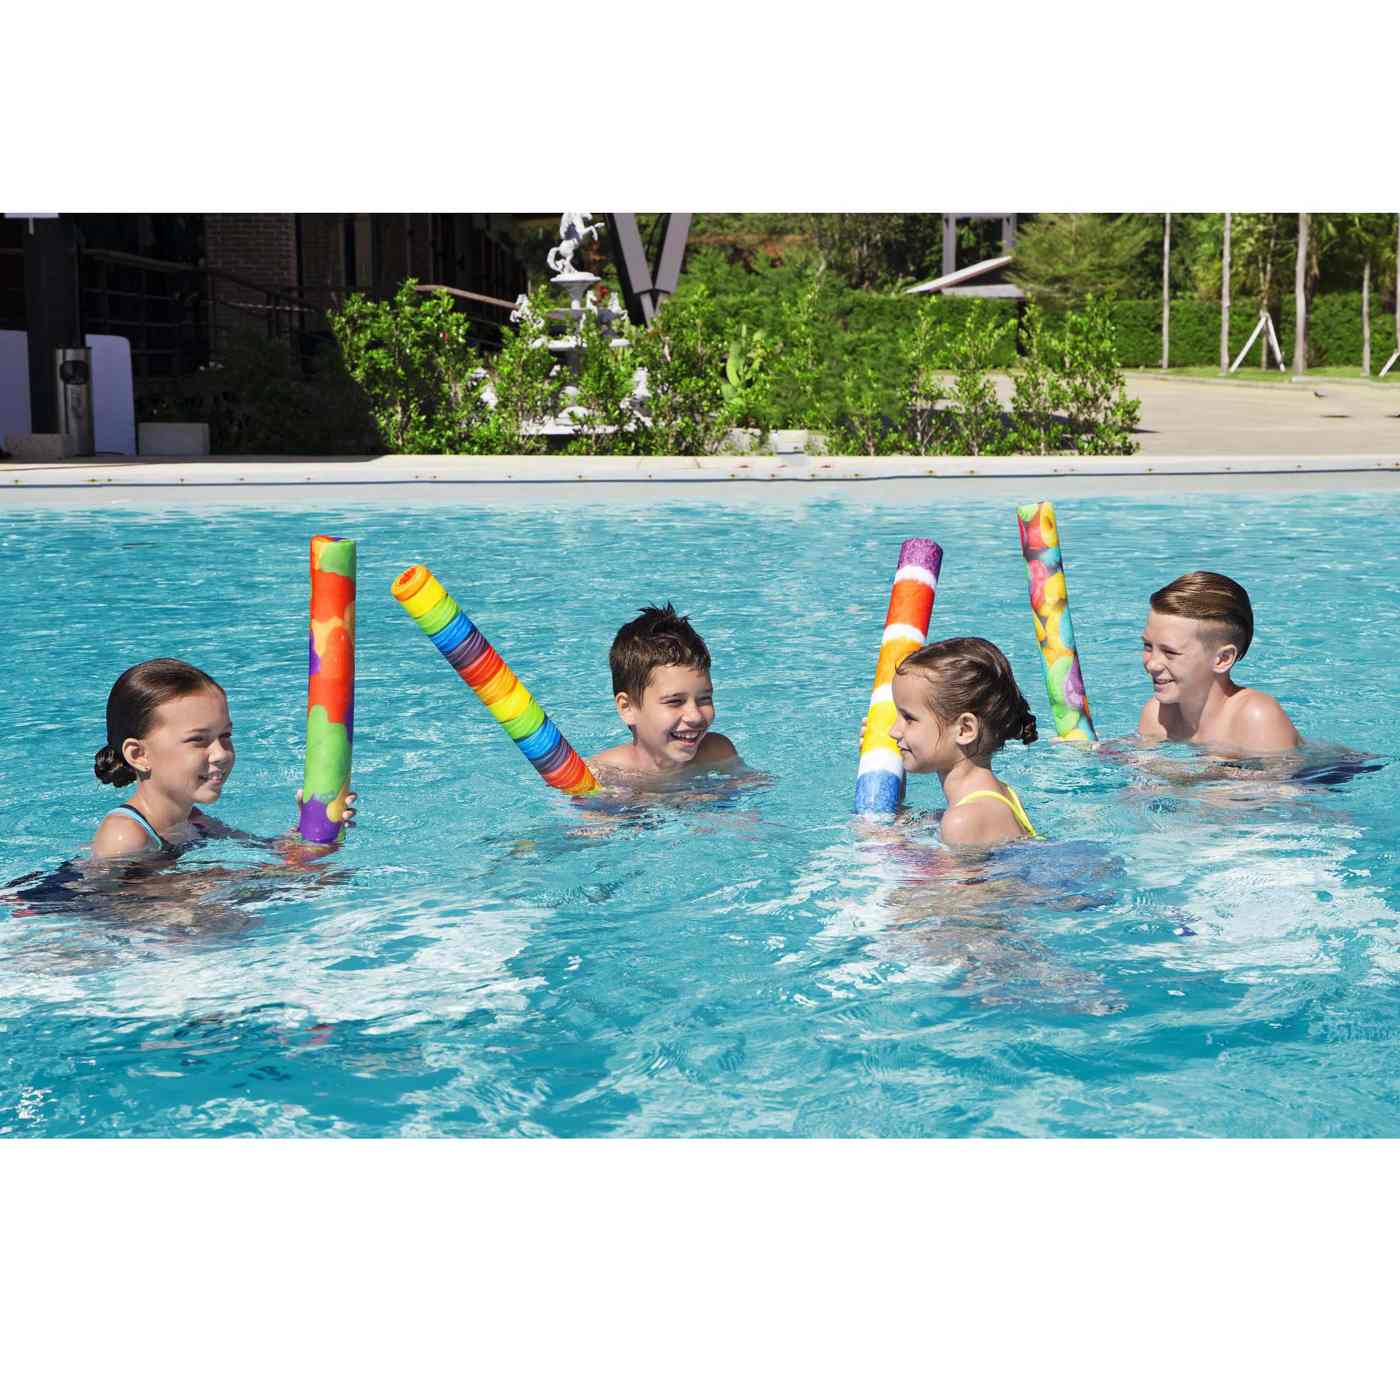 H2OGo! Fabric Cover Sugarcoated Pool Noodles, Assorted; image 2 of 3